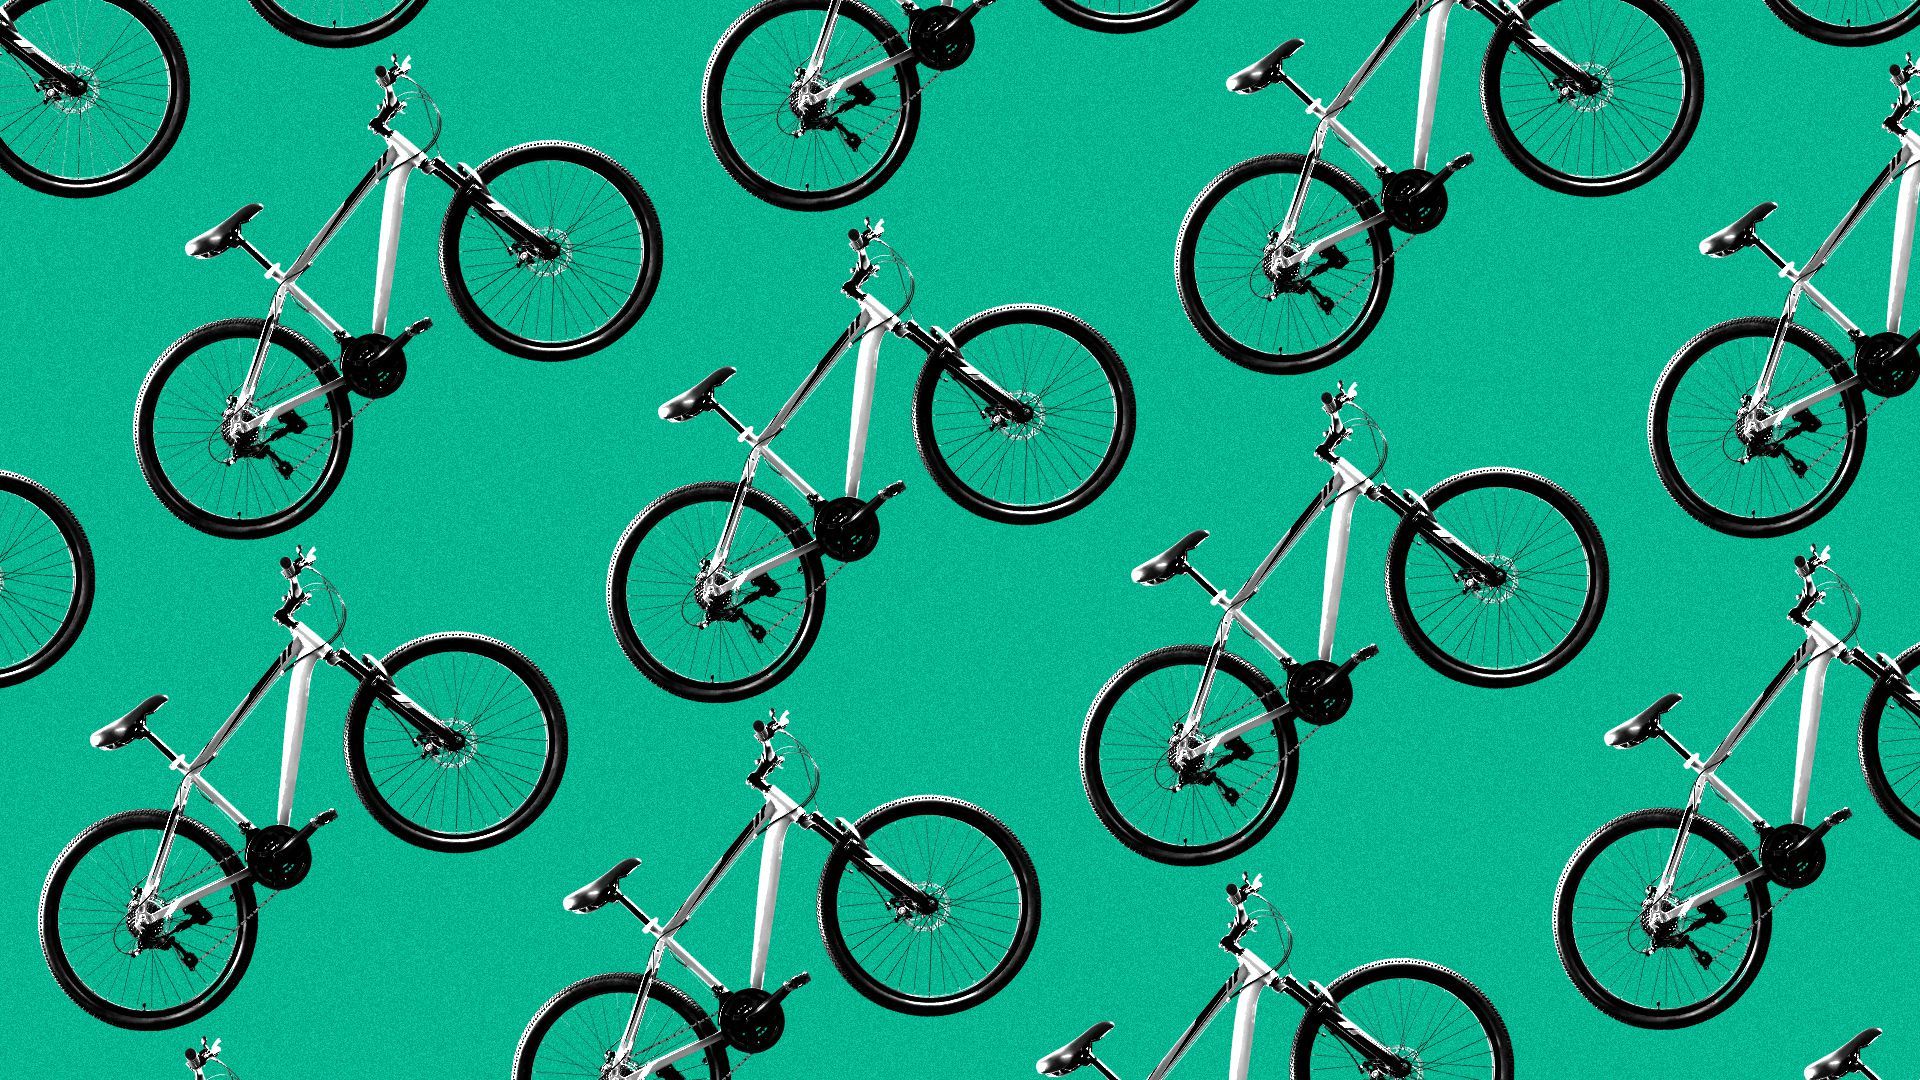 Illustration of a pattern of bicycles.